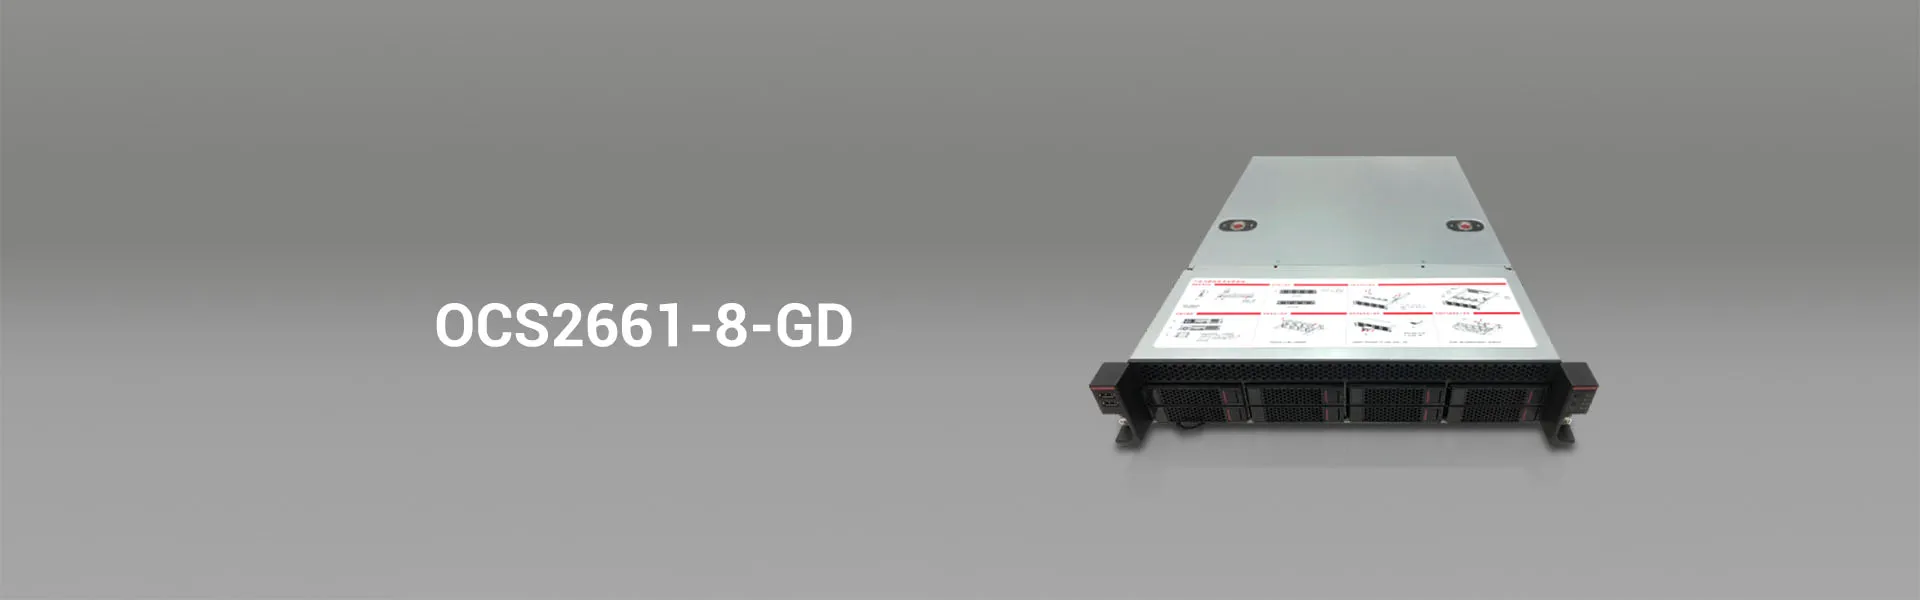 2U Hot-swap chassis - OCS2661-8-GD-onechassis